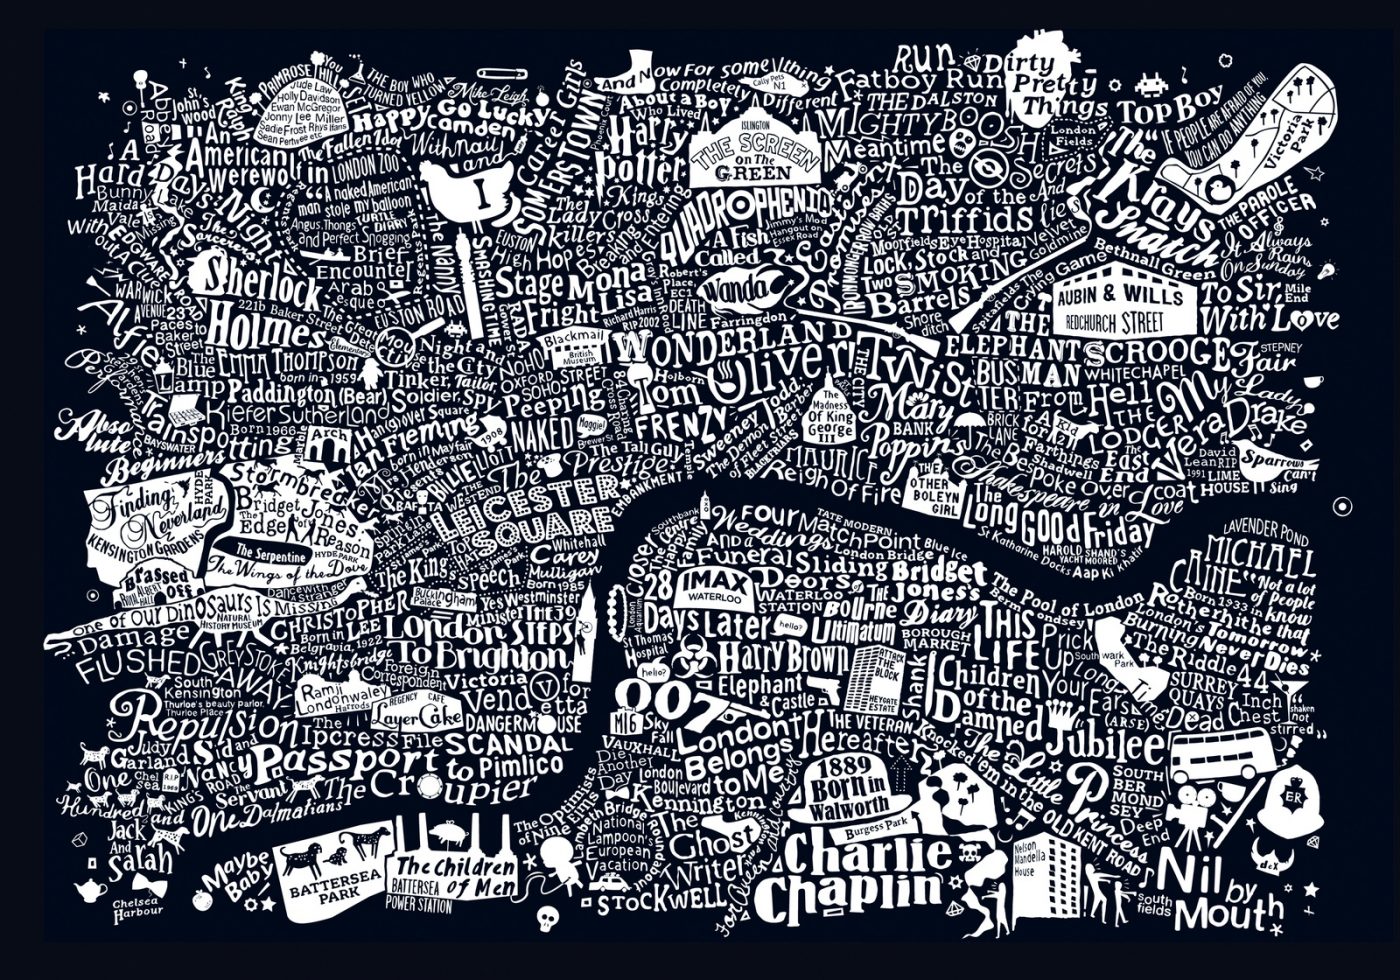 run for the hills Central london film map by Dex on ArtFinder